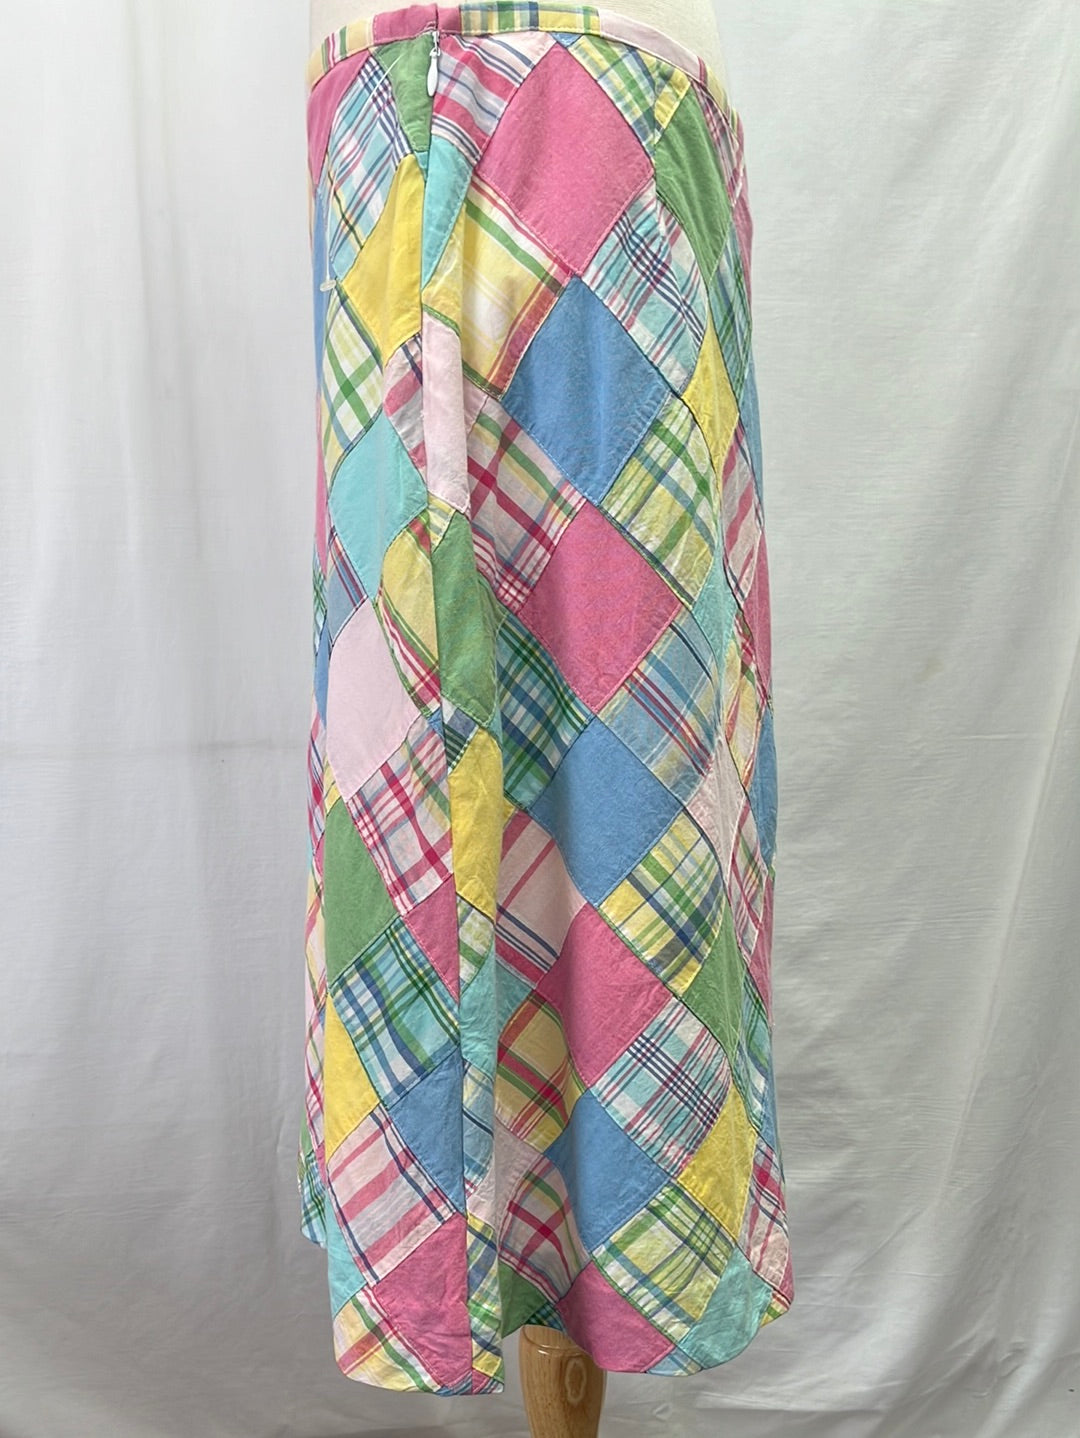 NWOT -- BROOKS BROTHER'S "346" Pastel Quilted Flared Midi Skirt -- Size 12